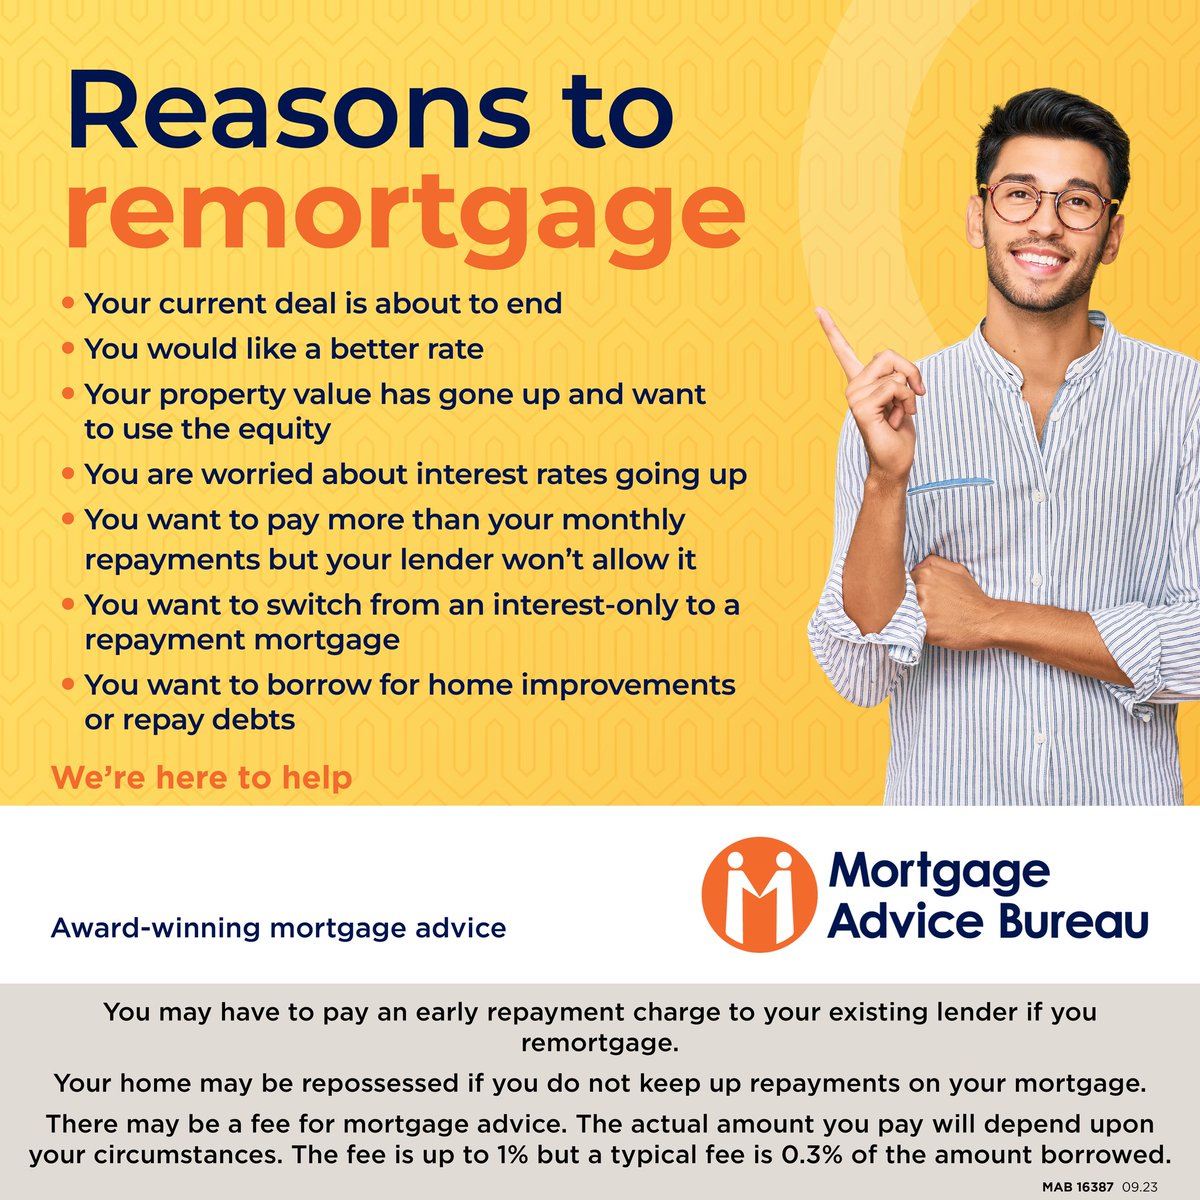 Just as you did when you took out your first mortgage, it's good to evaluate your finances from time to time, especially with the cost of living rising. Get in touch to book your free initial appointment, so we can help find the best mortgage for you📞 #Mortgage #Remortgage